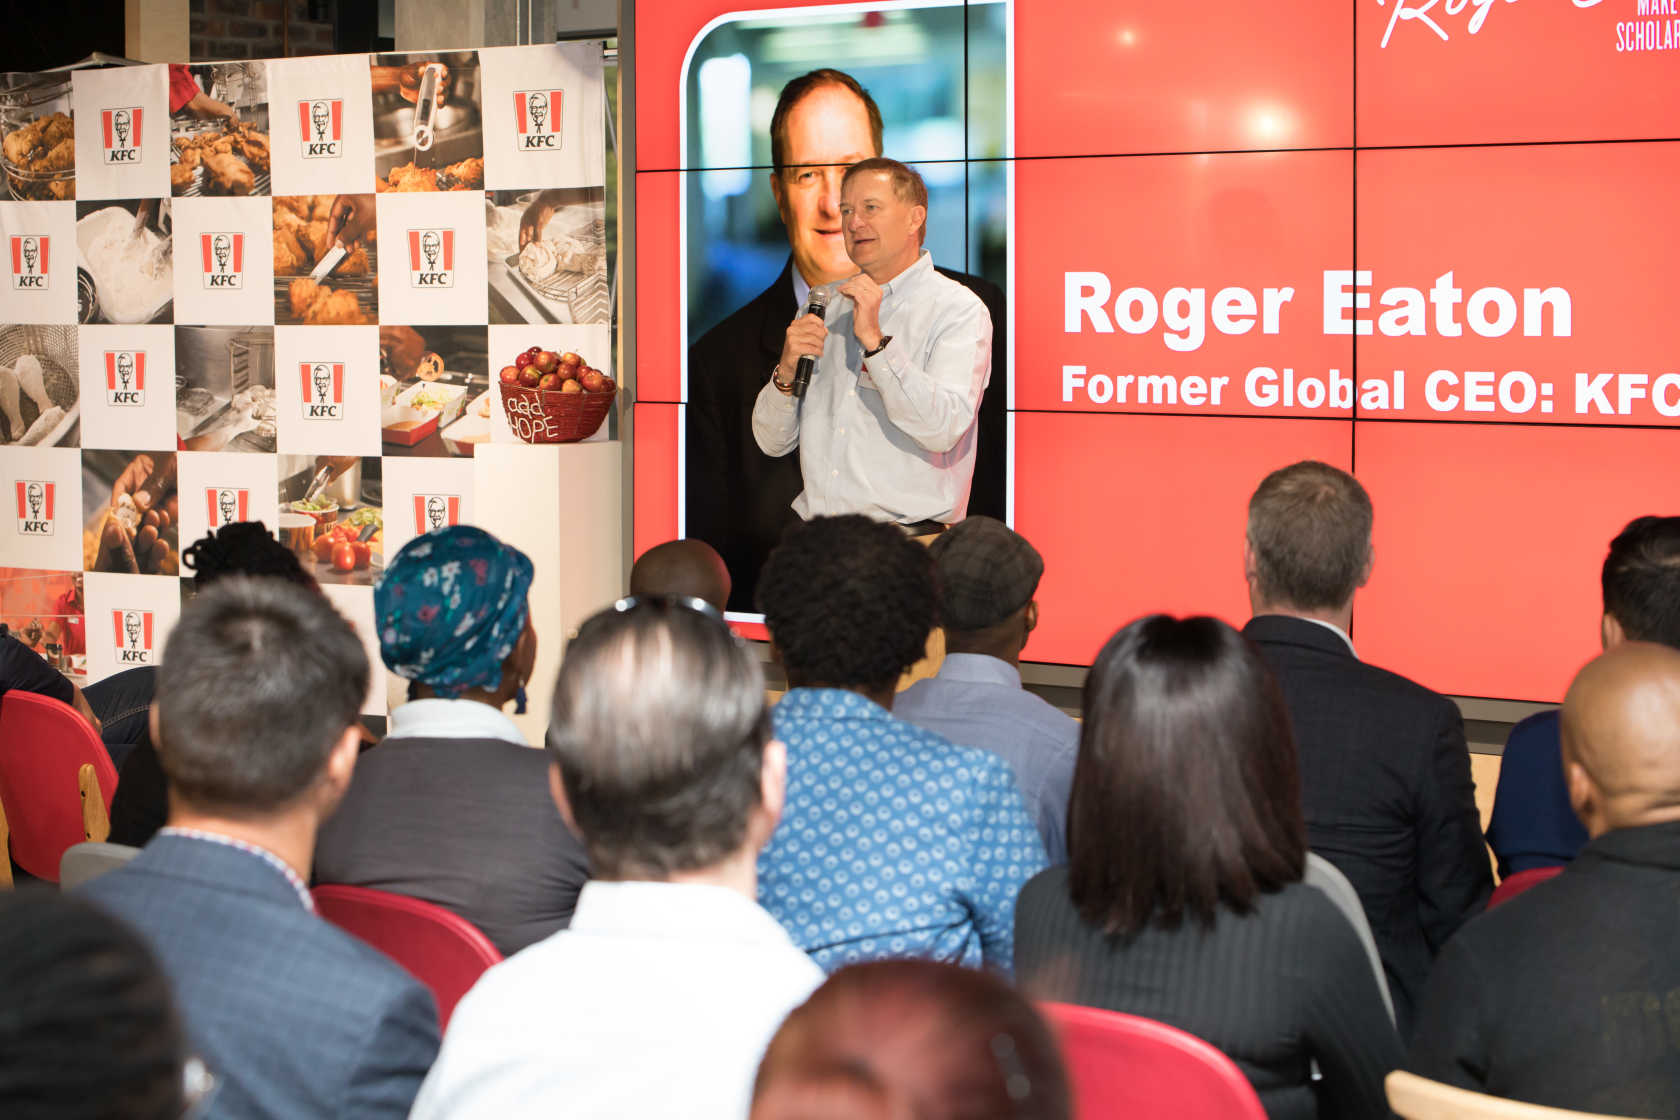 FORMER KFC GLOBAL CEO COMES HOME TO PRESENT THE INAUGURAL ROGER EATON “MAKE A DIFFERENCE” SCHOLARSHIP AWARD  